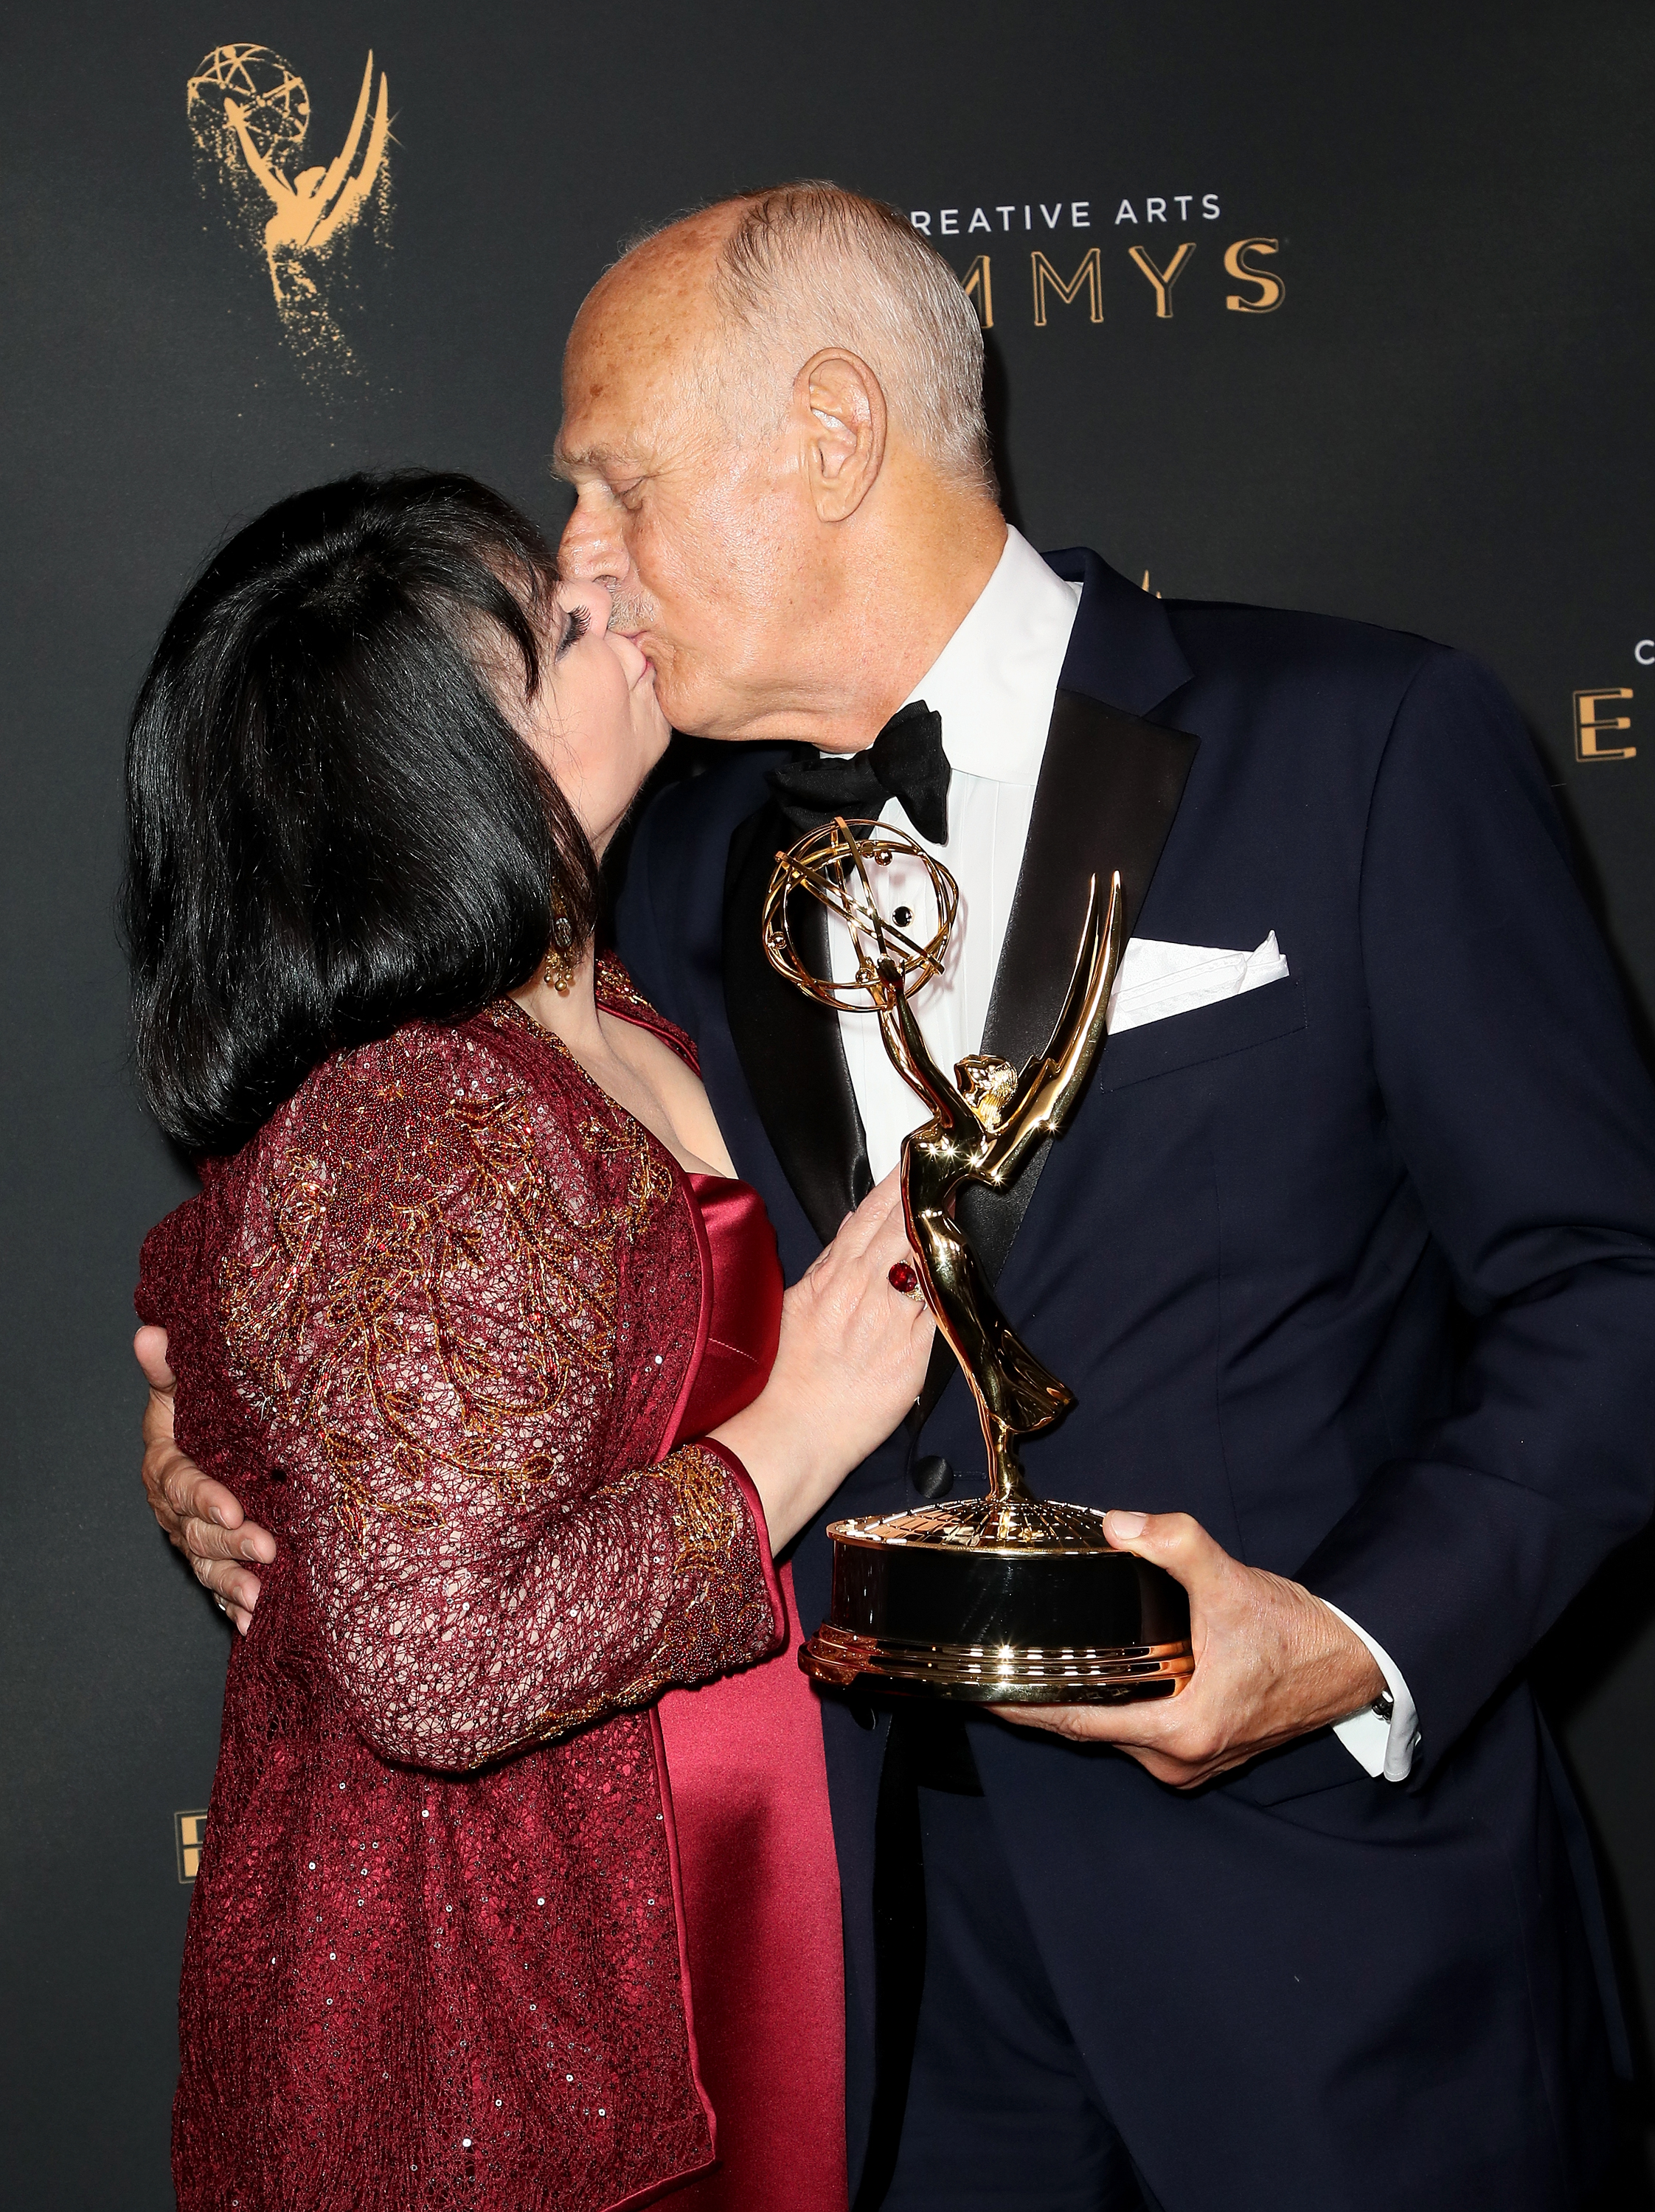 Delta Burke and Gerald McRaney during the 2017 Creative Arts Emmy Awards at Microsoft Theater on September 10, 2017 in Los Angeles, California | Source: Getty Images